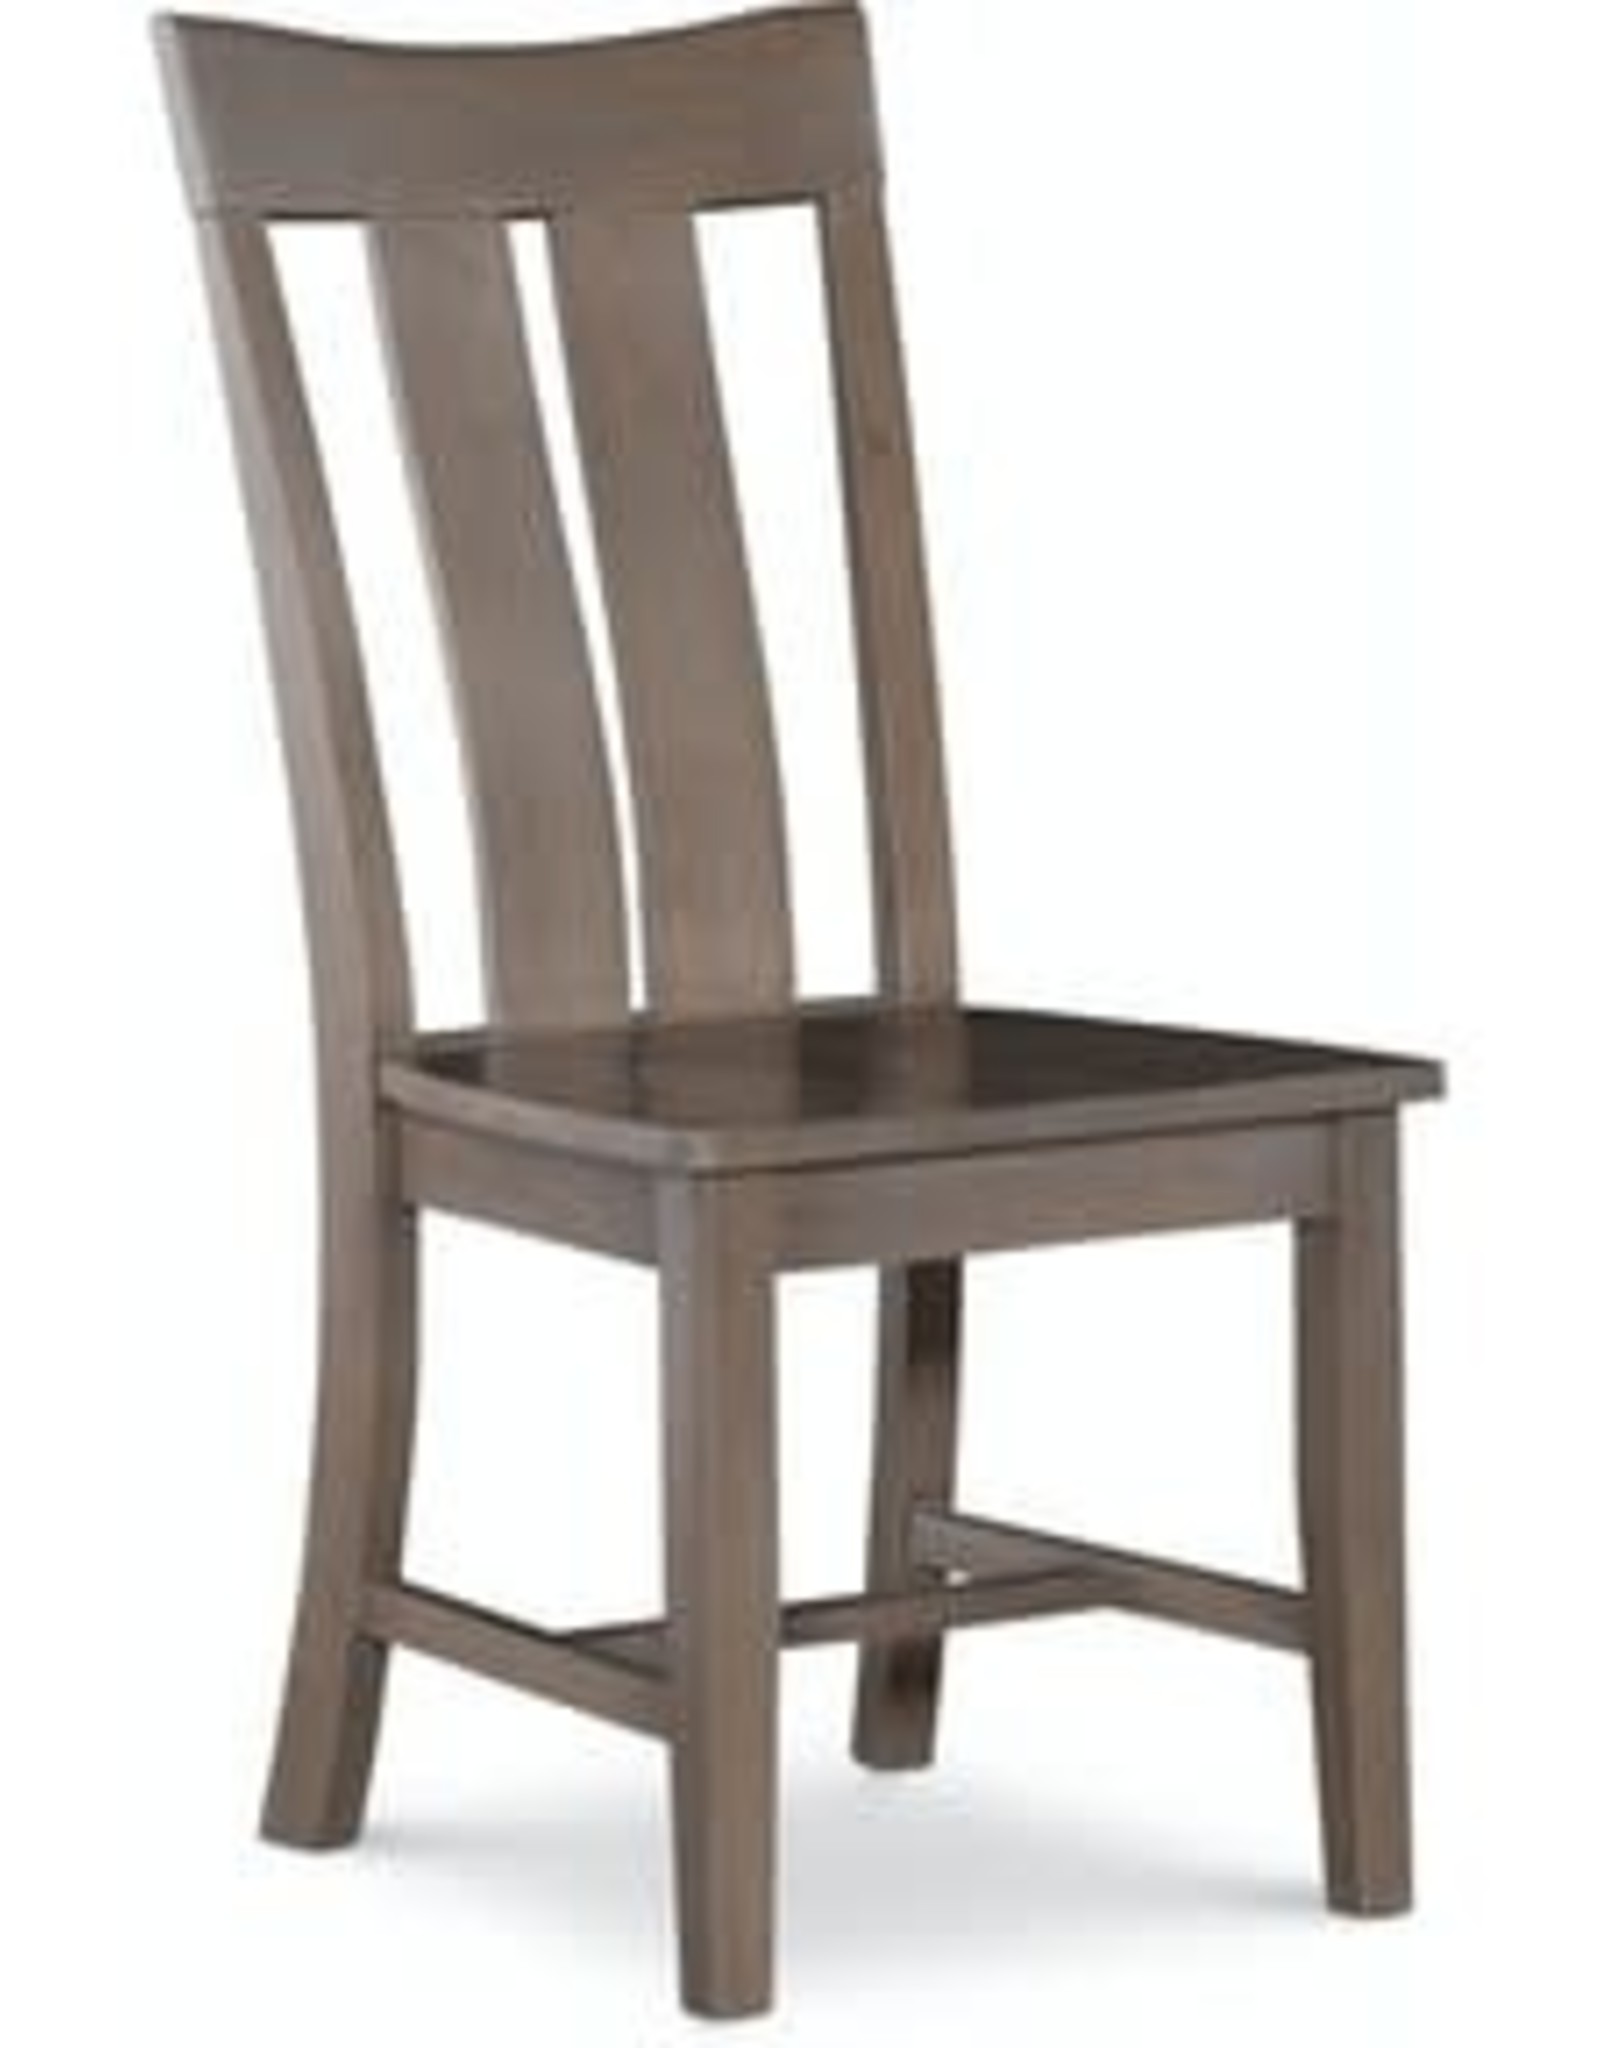 Whitewood Cosmopolitan Ava Dining Chair (specify color)